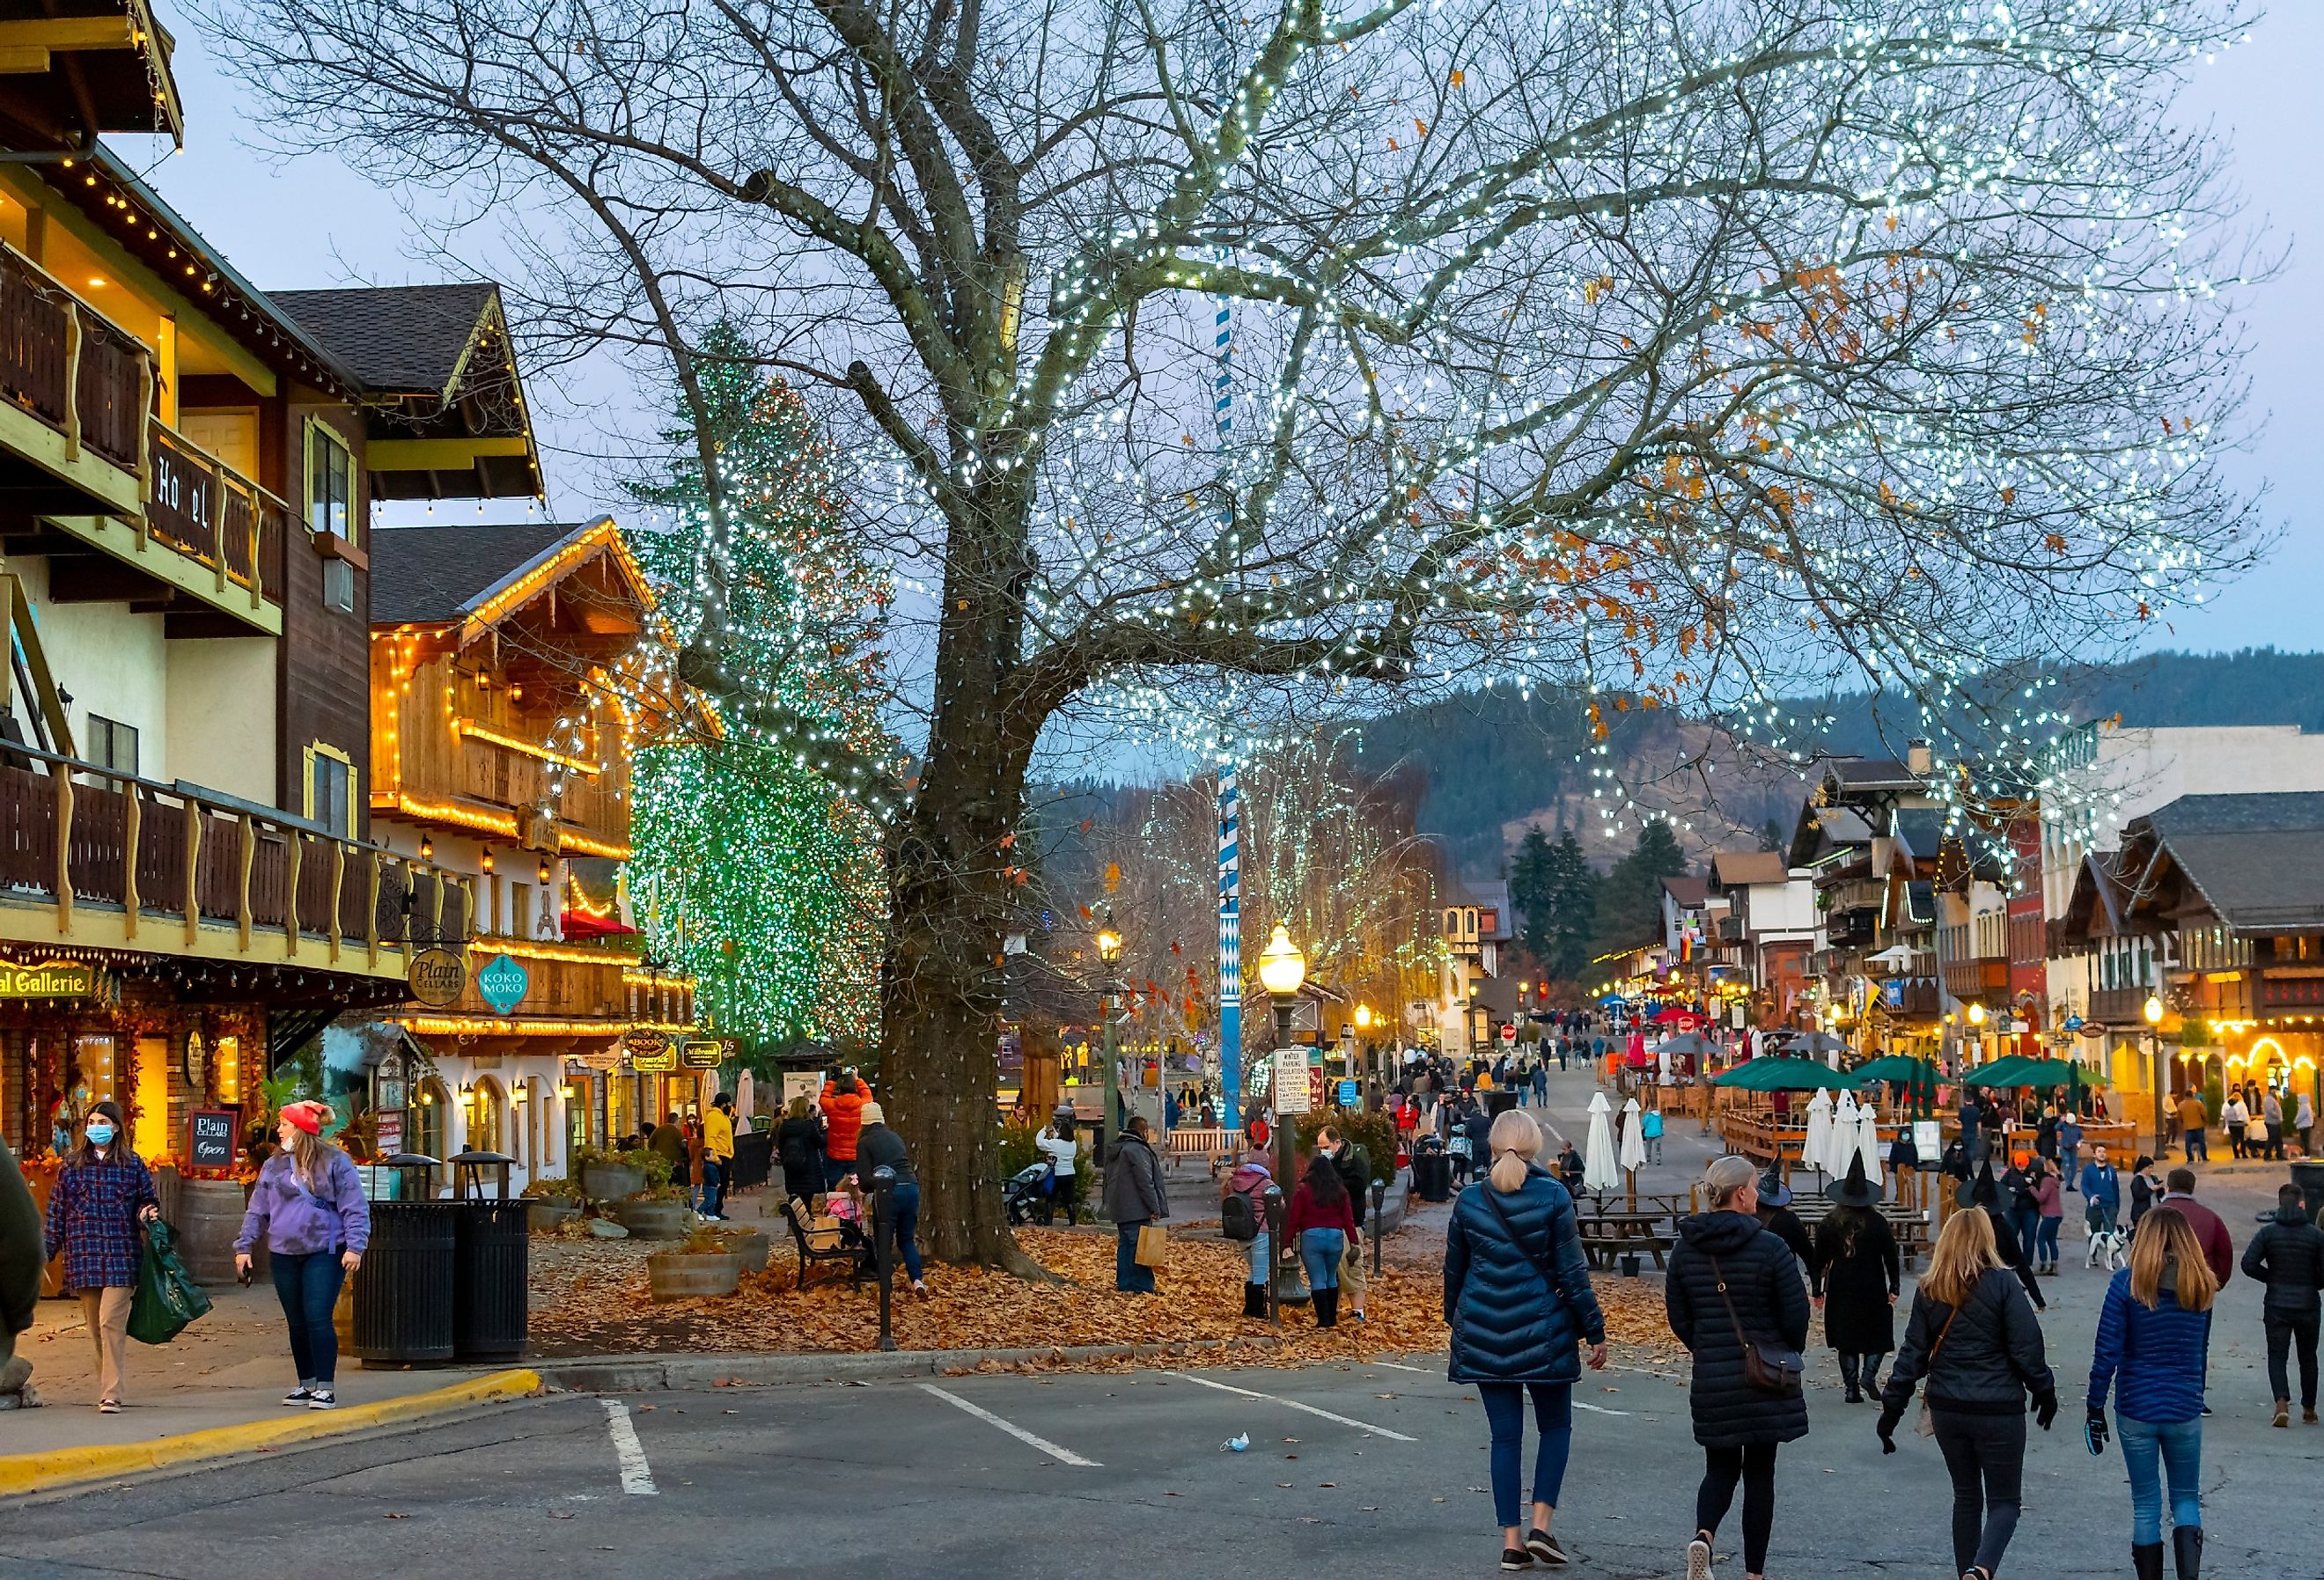 Tourists wander the main street of the Bavarian themed town of Leavenworth with shops illuminated and holiday lights on the trees.